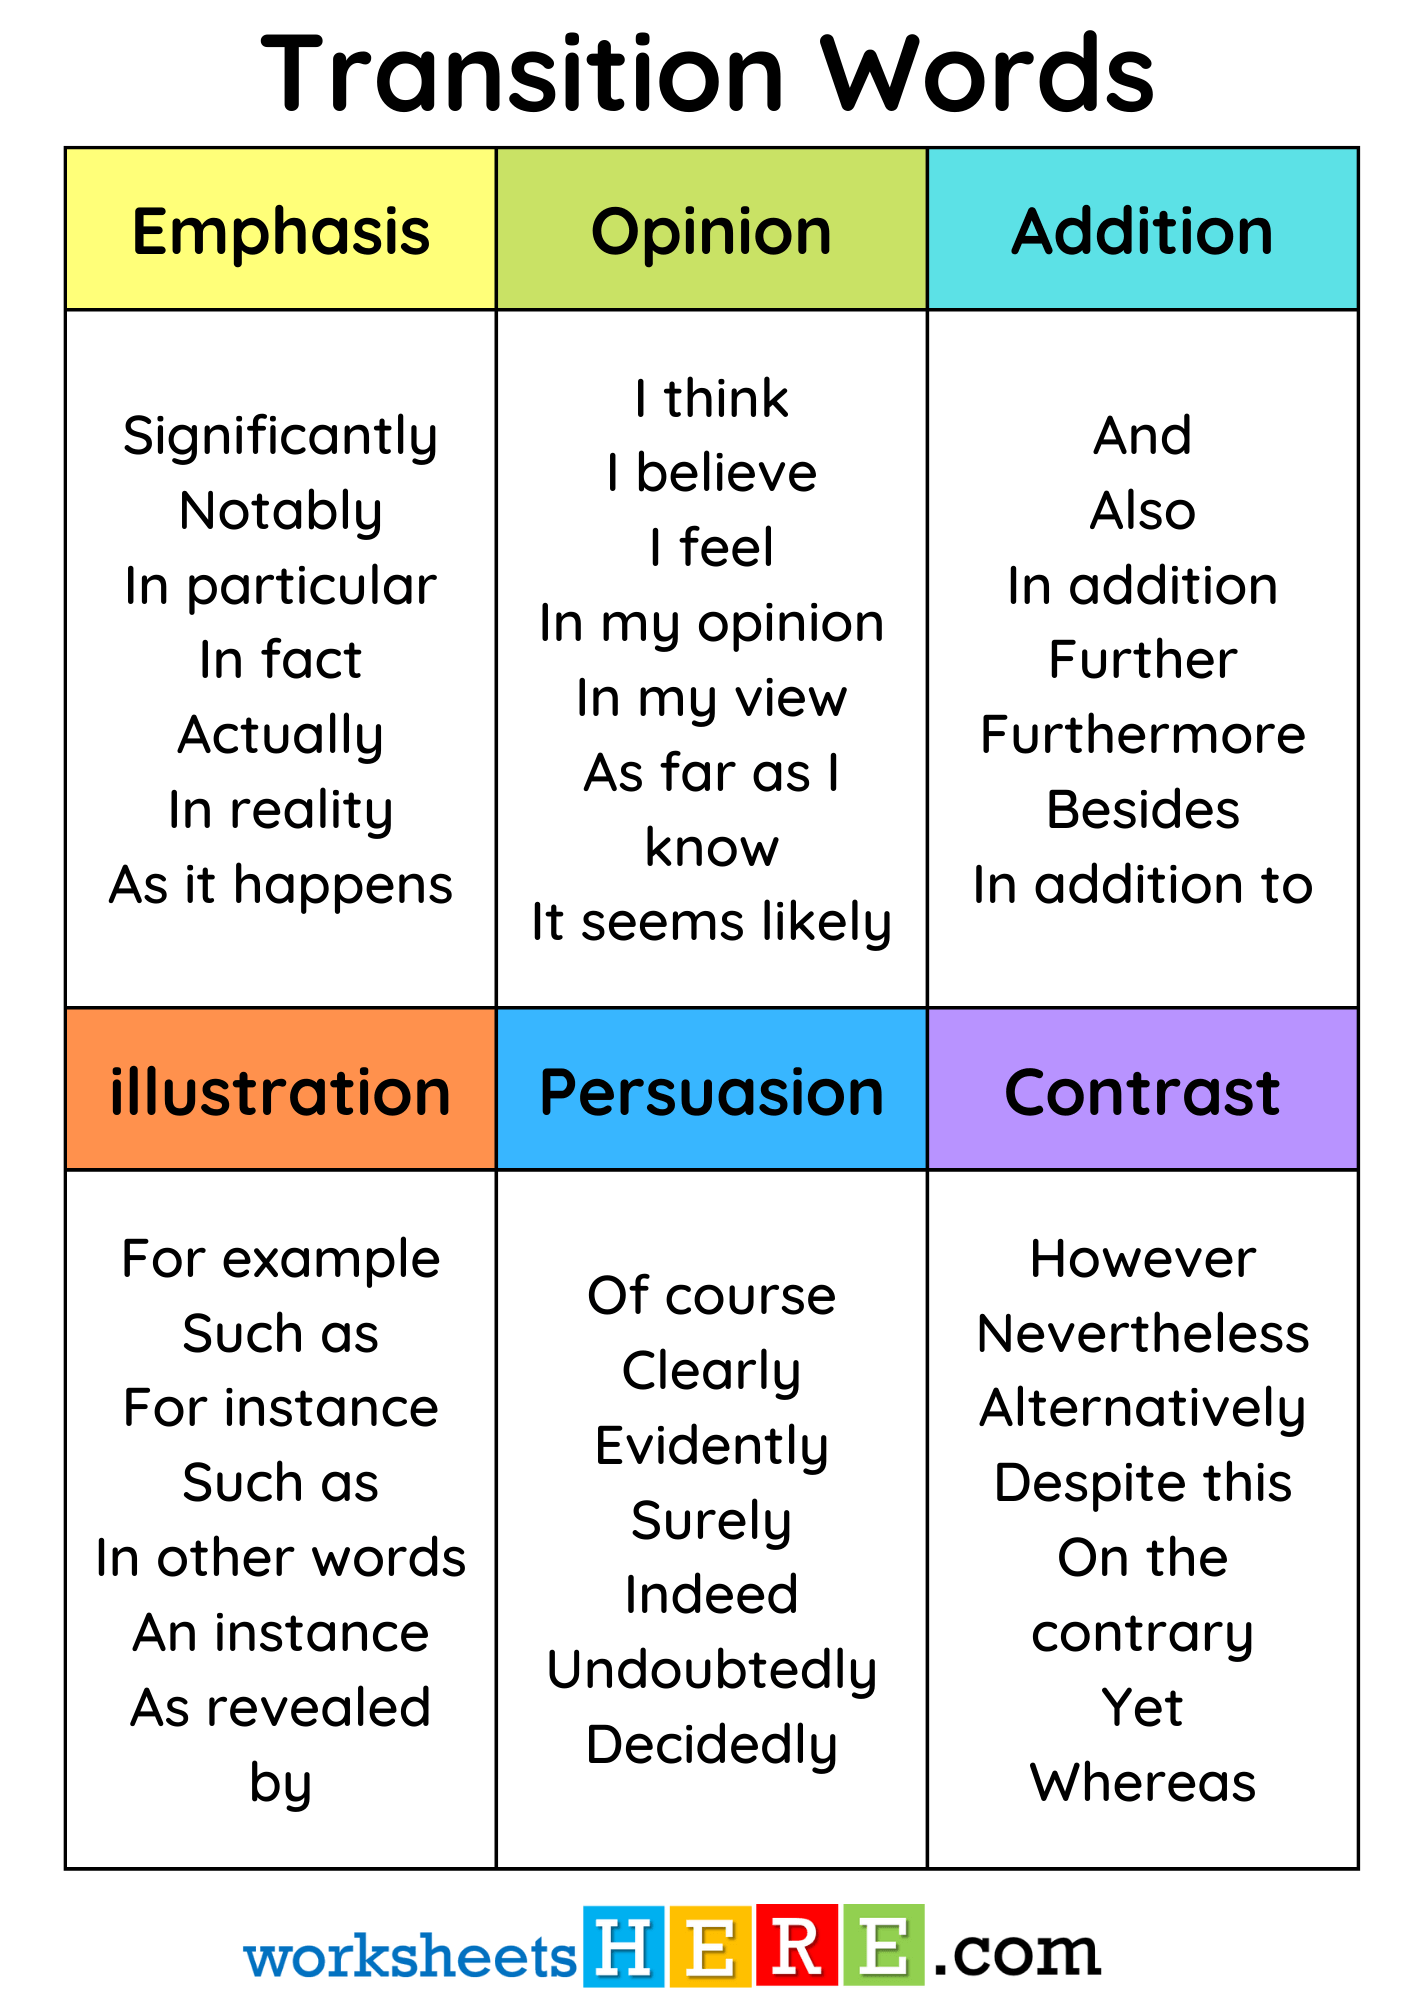 Transition Words of Emphasis, Opinion, Addition, illustration, Persuasion, Contrast PDF Worksheet